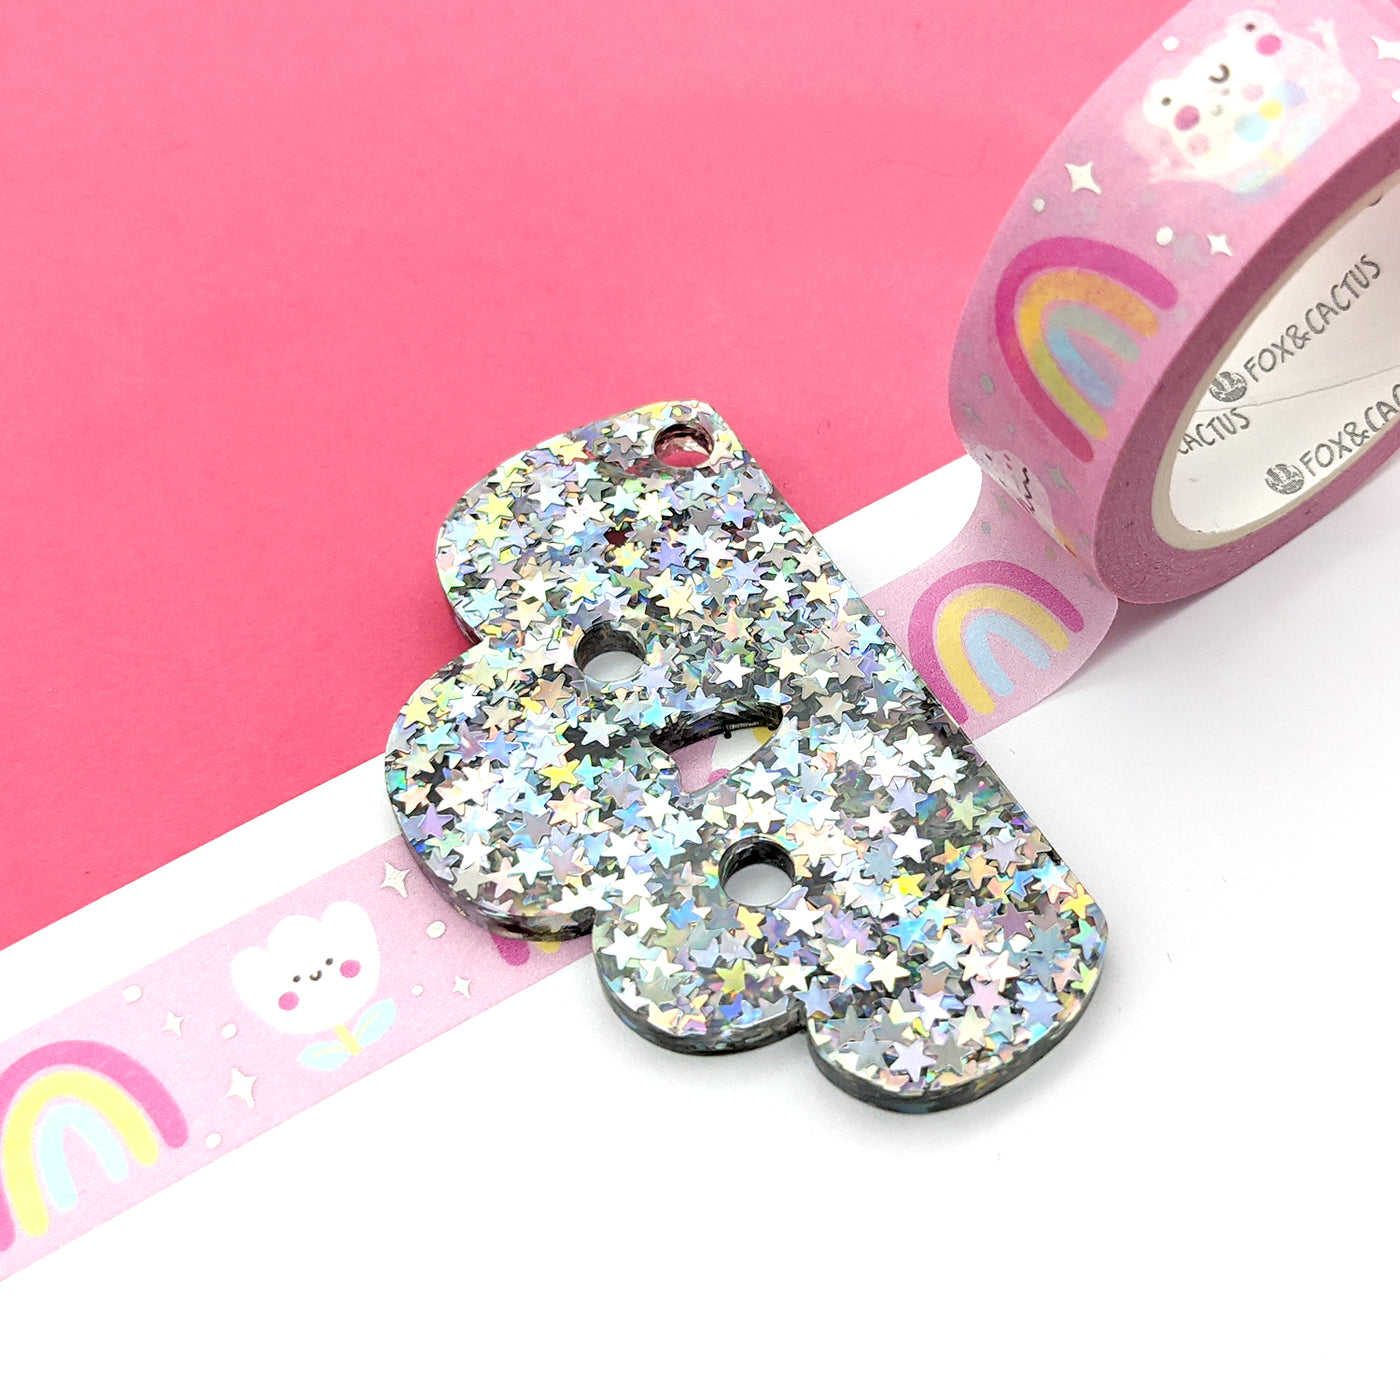 Sparkly Cloud Washi Cutter by Fox and Cactus